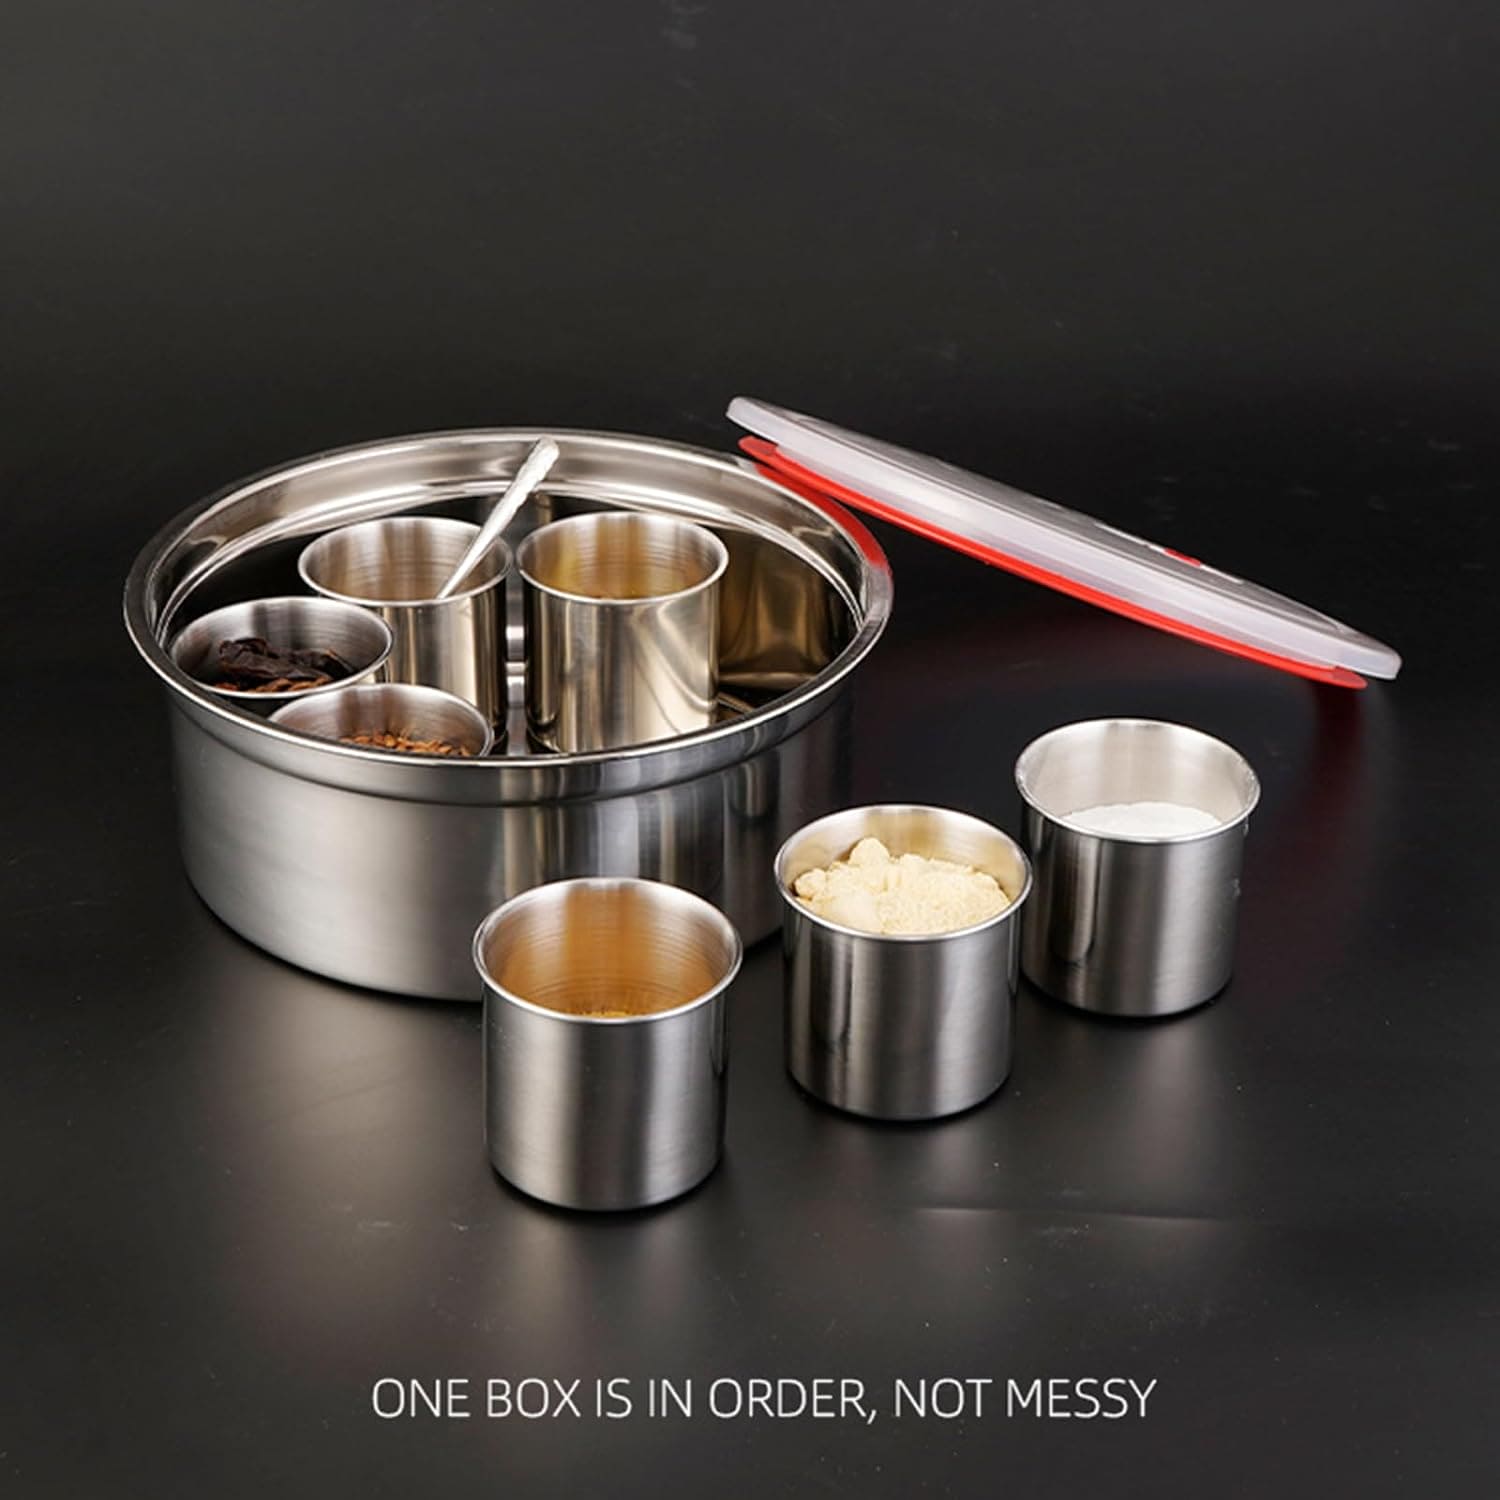 7 Grid Steel Spice Box With Spoon, Kitchen Household Masala Dabba, Stainless Steel Seasoning Box, Round Spice Jar with Transparent Lid, Multifunctional And Elegant Spice Box